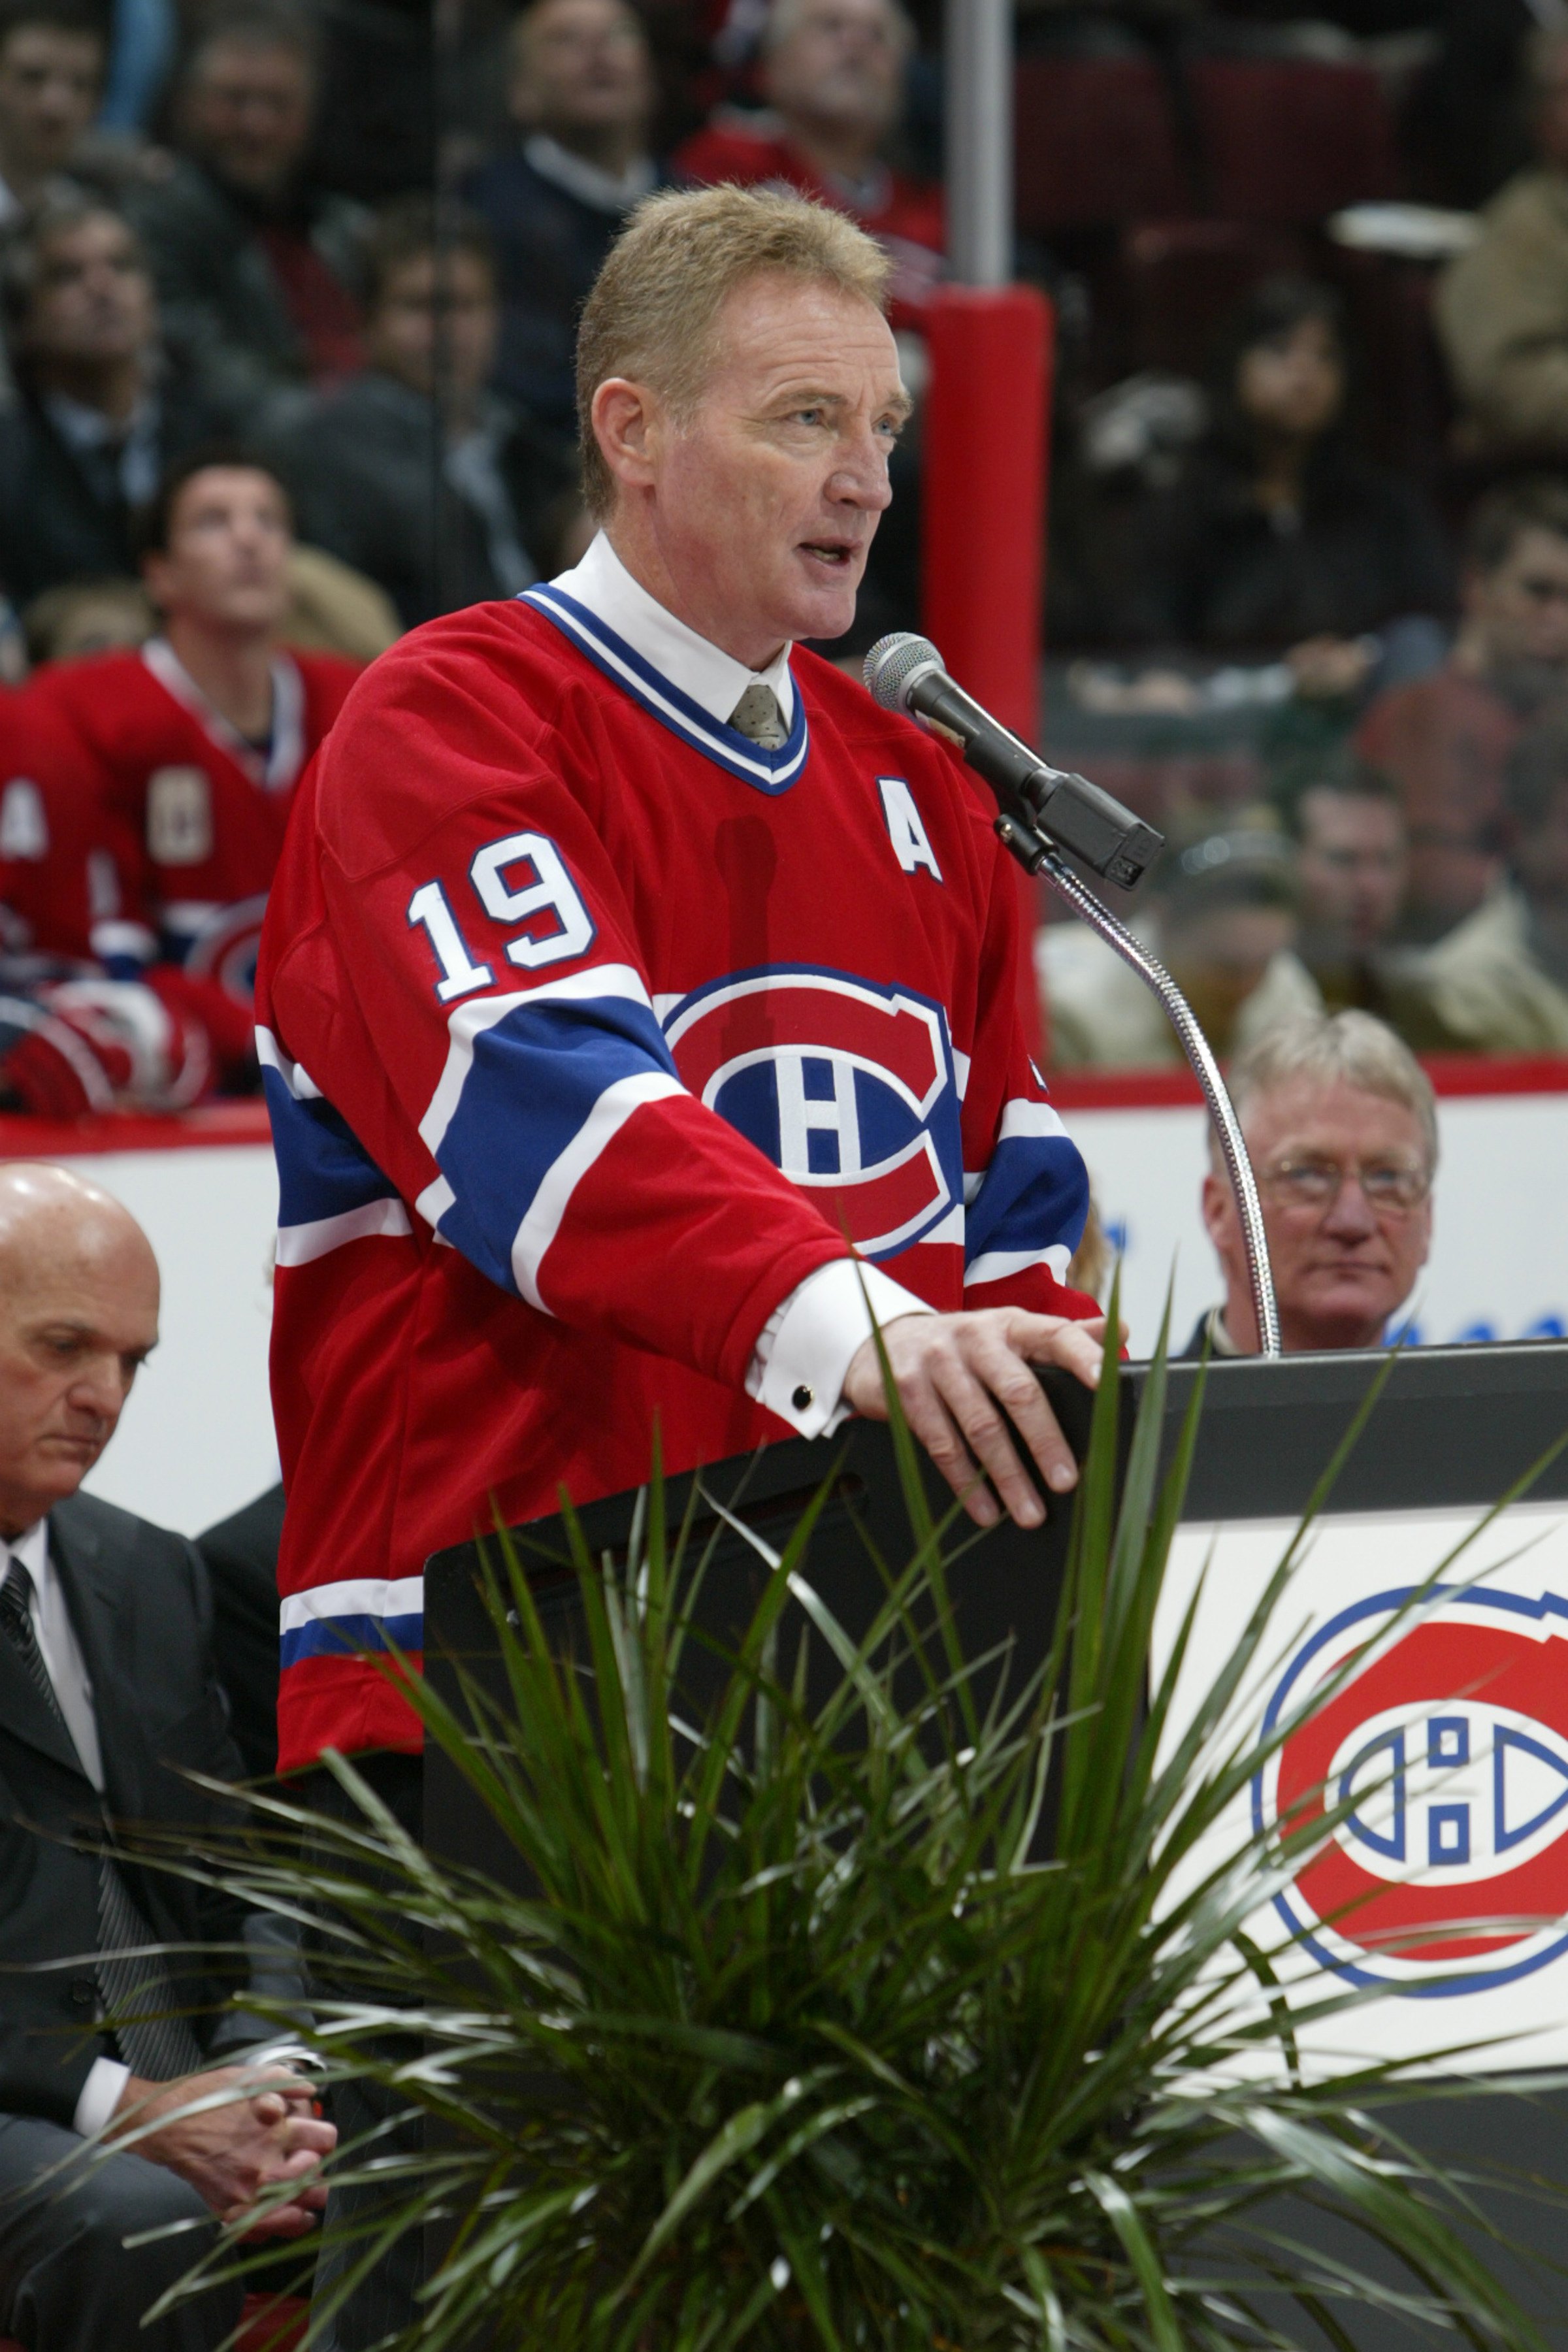 MONTREAL - NOVEMBER 19:  Larry Robinson speaks during his jersey retirement ceremony before the NHL game of the Montreal Canadiens against the Ottawa Senators at Bell Centre on November 19, 2007 in Montreal, Quebec. (Photo by Dave Sandford/Getty Images)